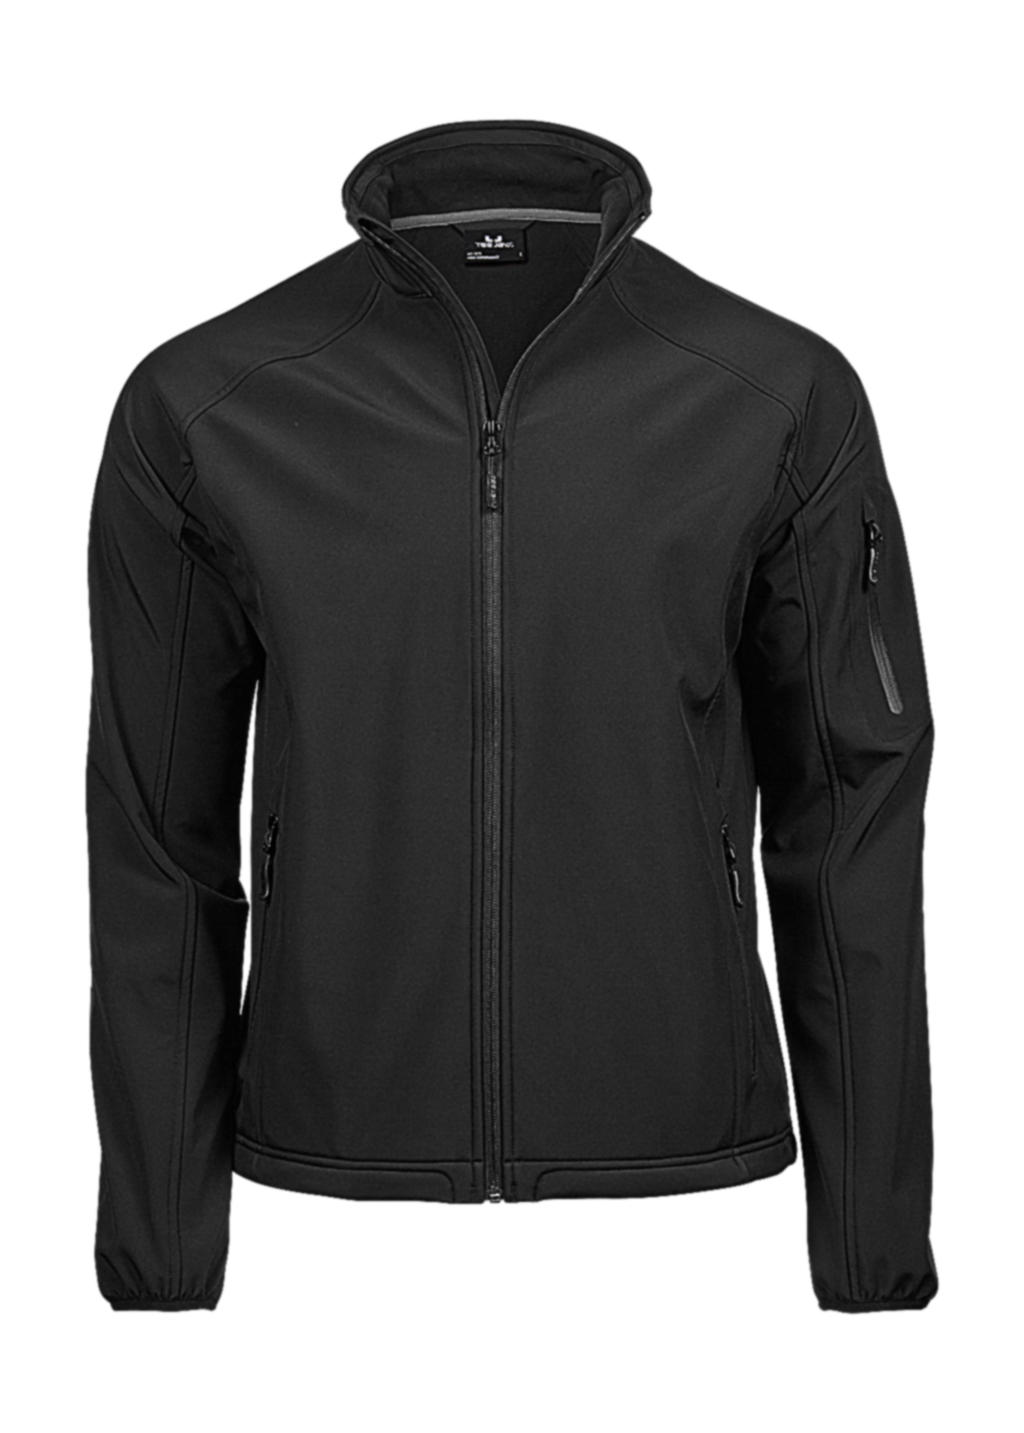  Lightweight Performance Softshell in Farbe Black